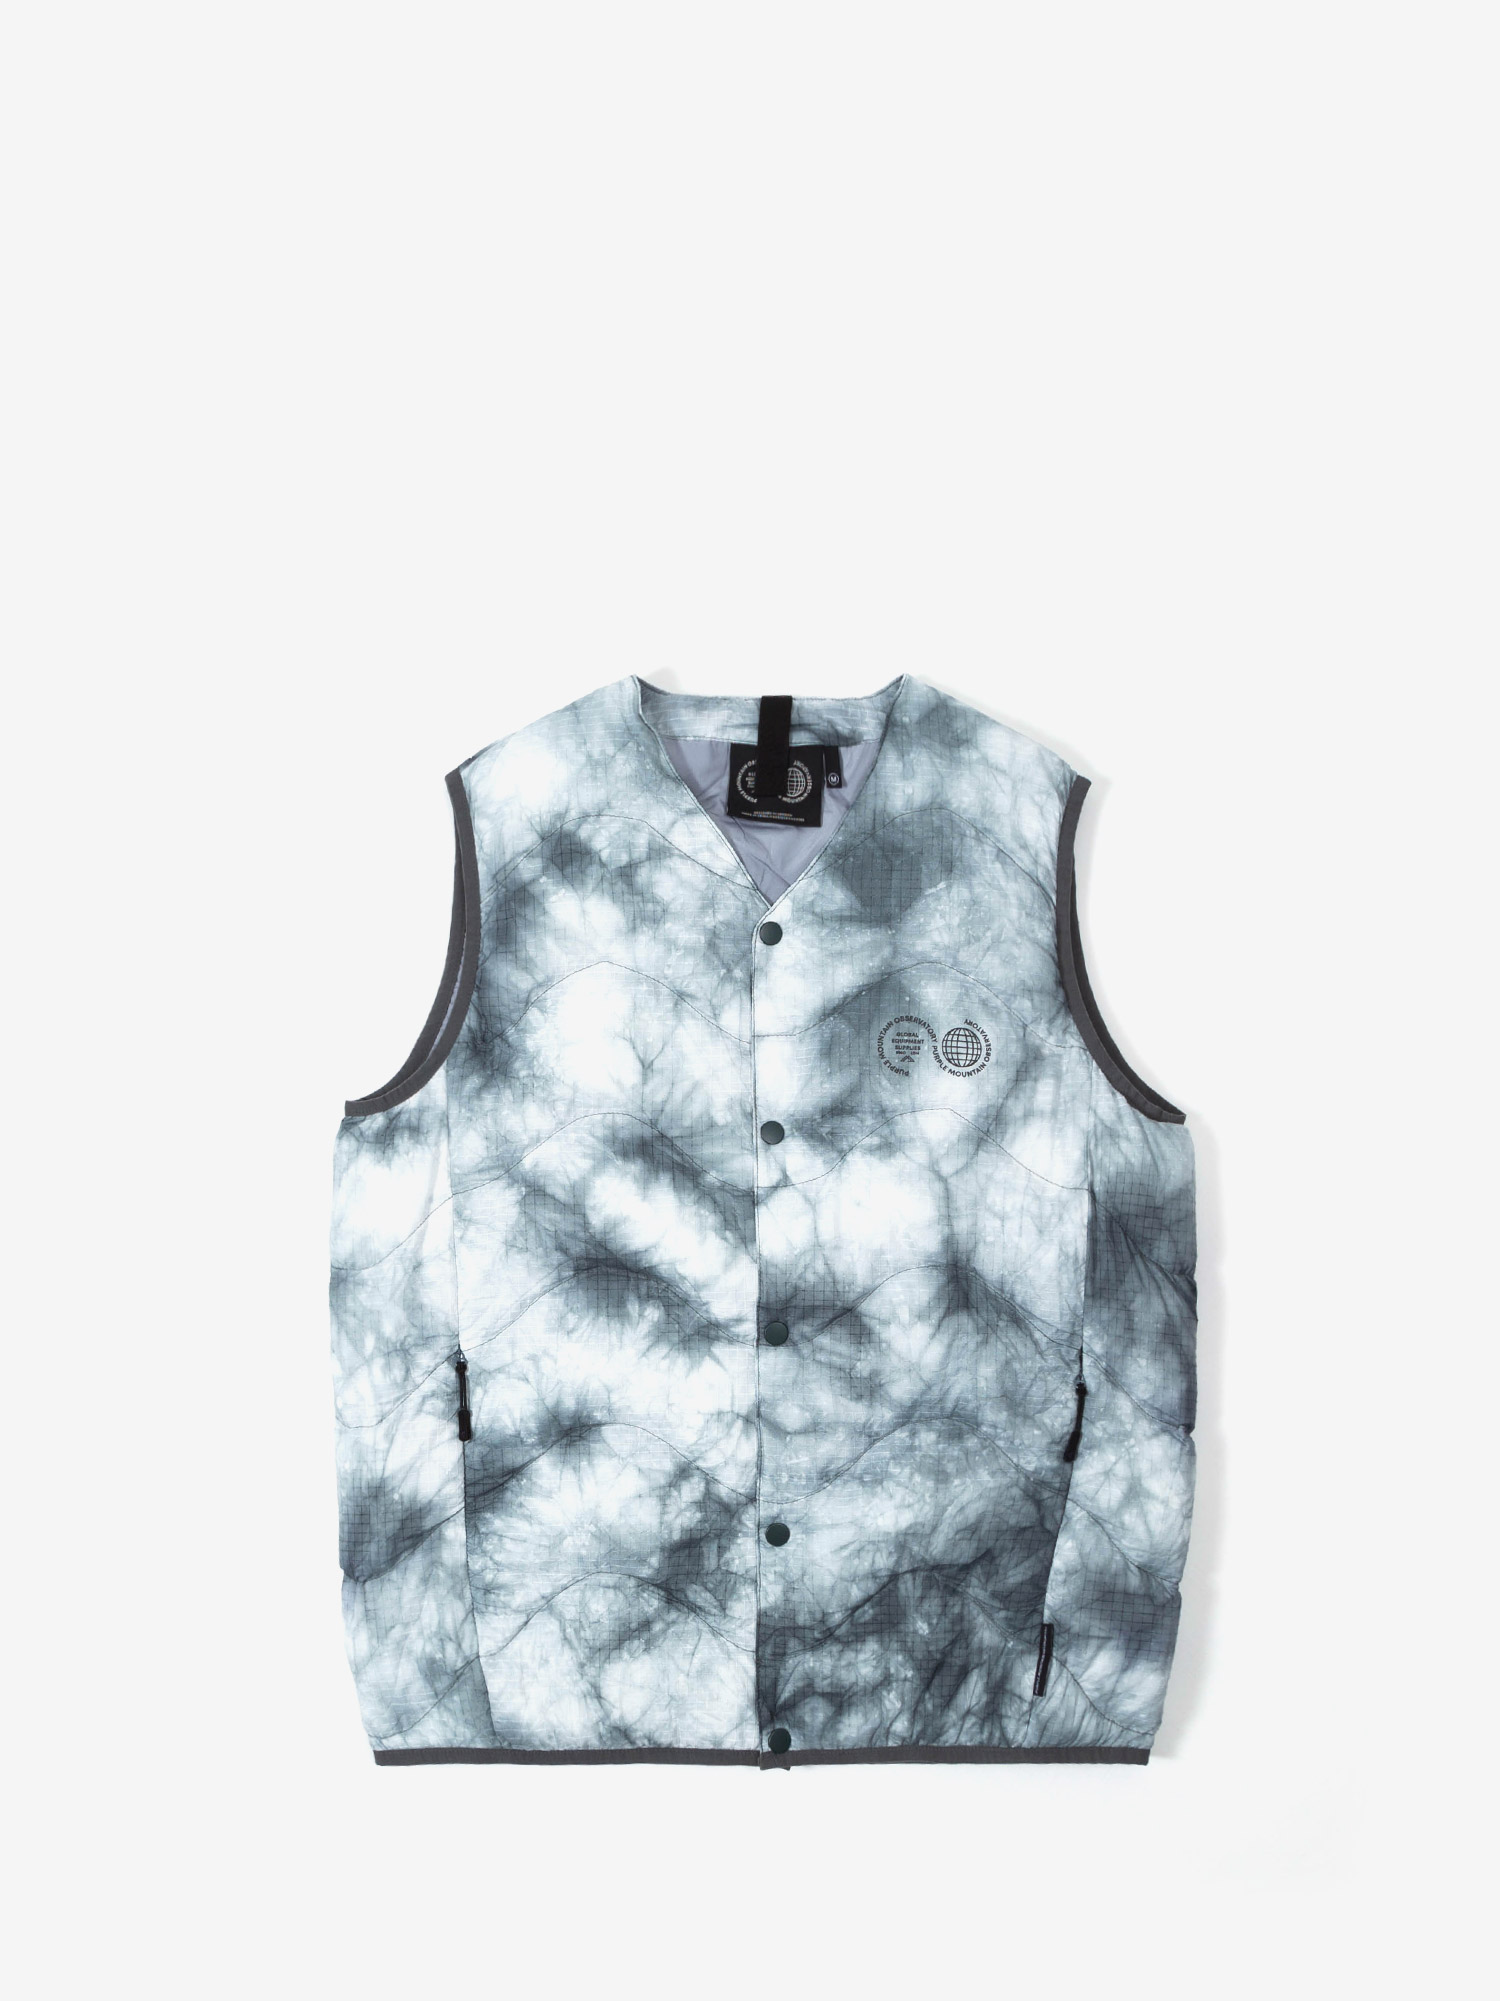 Featured image for “WAVE QUILTED VEST ICE DYE”